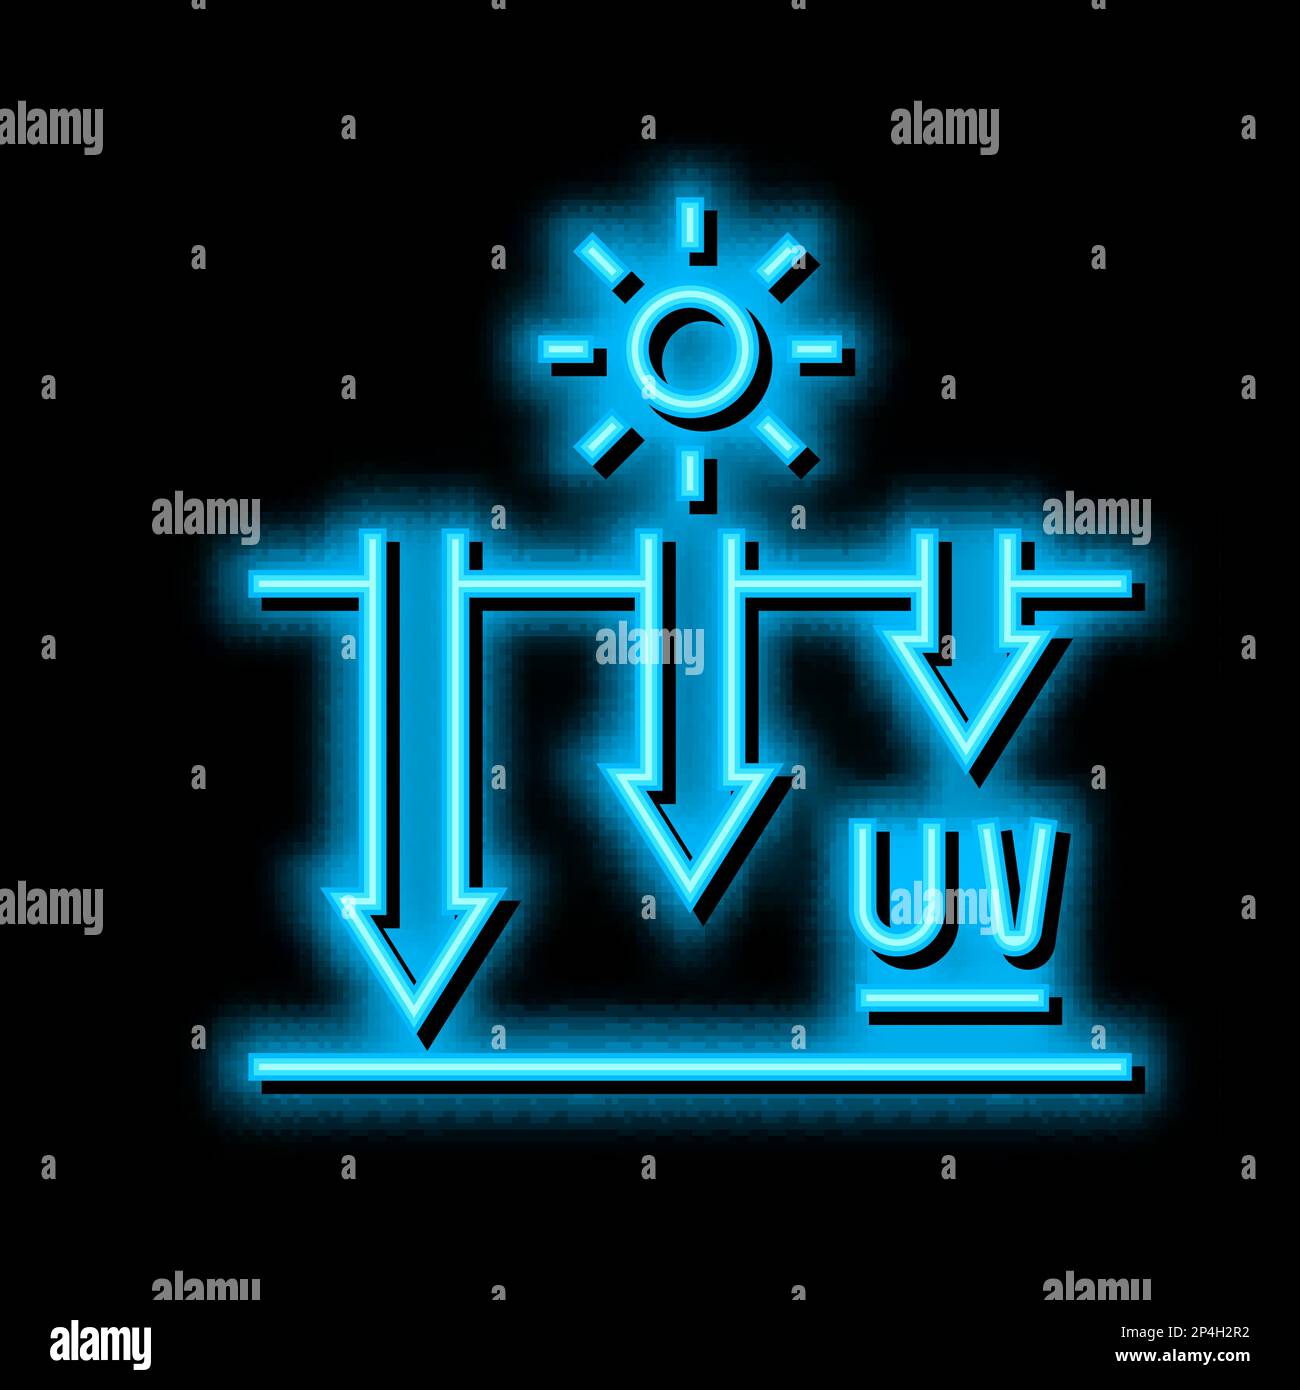 exposure of skin to uv rays tanning process neon glow icon illustration Stock Vector